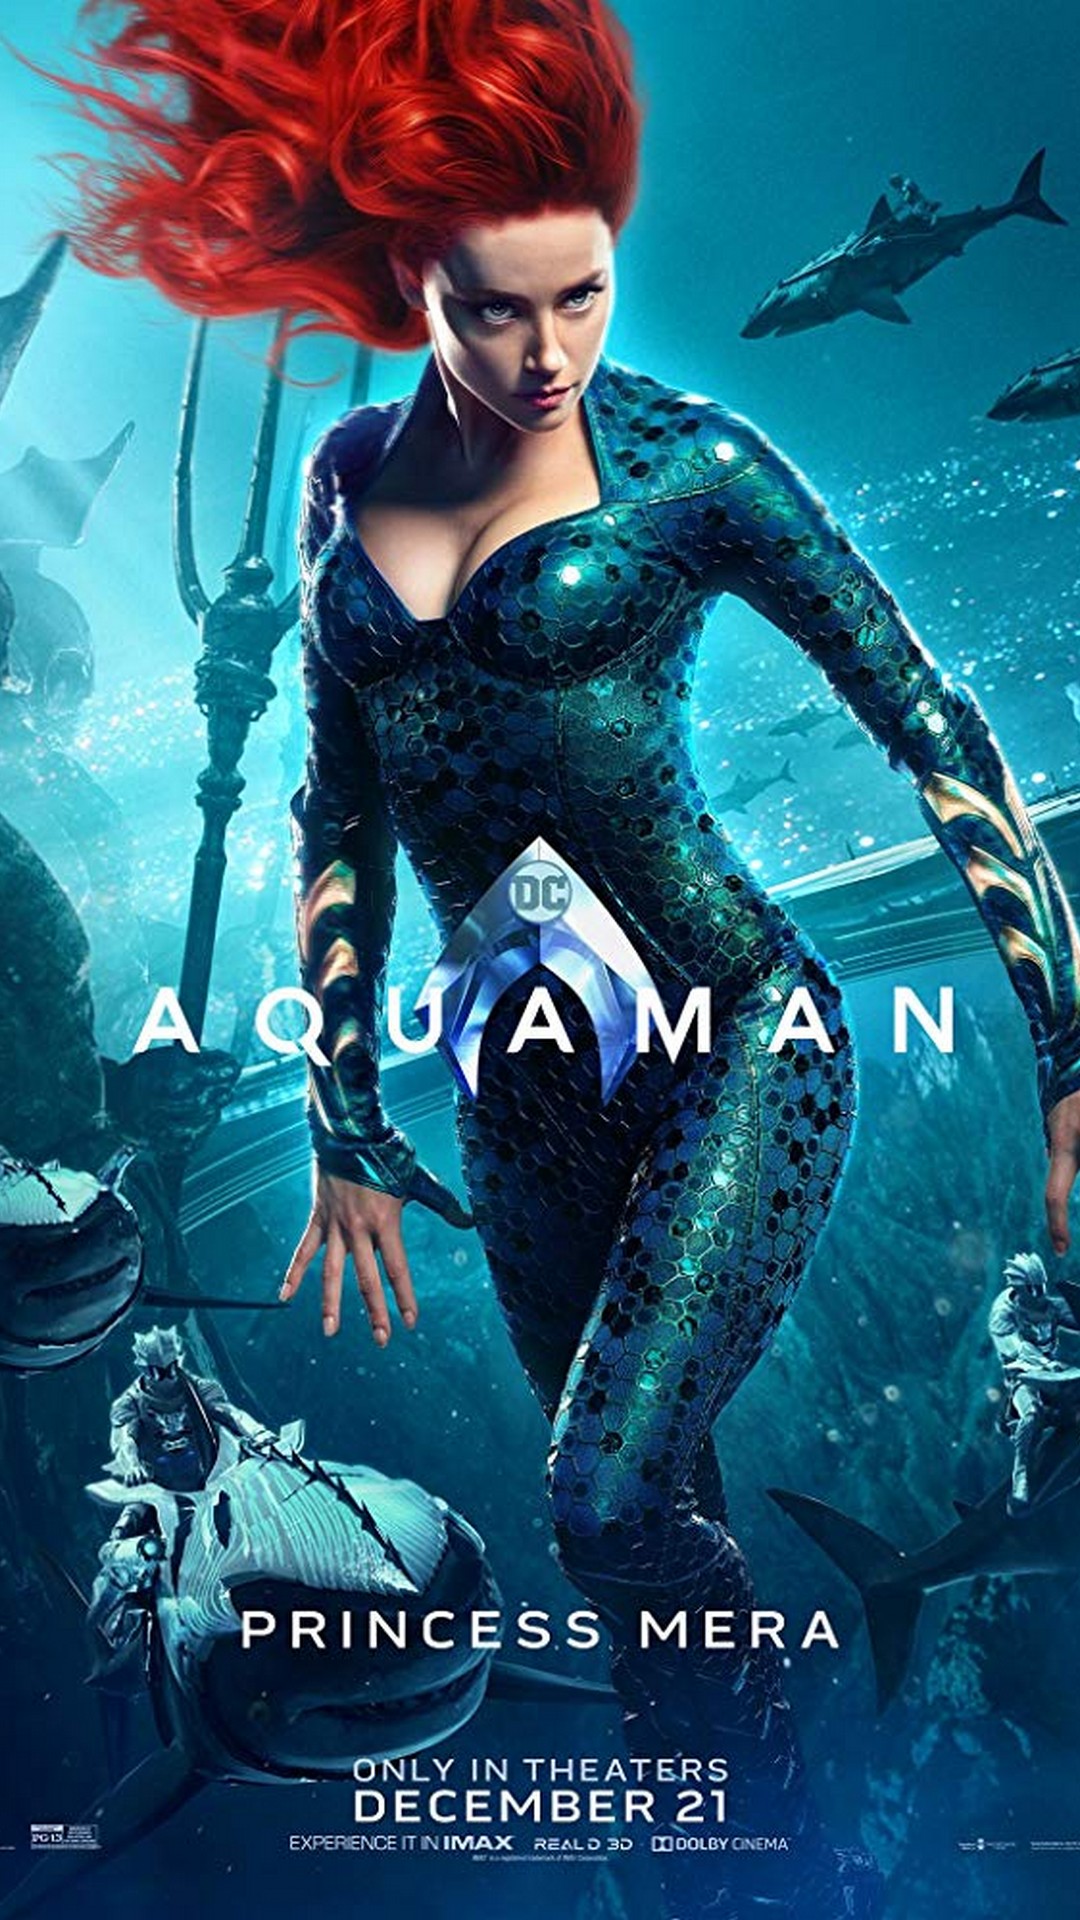 Wallpapers Phone Aquaman with image resolution 1080x1920 pixel. You can make this wallpaper for your Android backgrounds, Tablet, Smartphones Screensavers and Mobile Phone Lock Screen